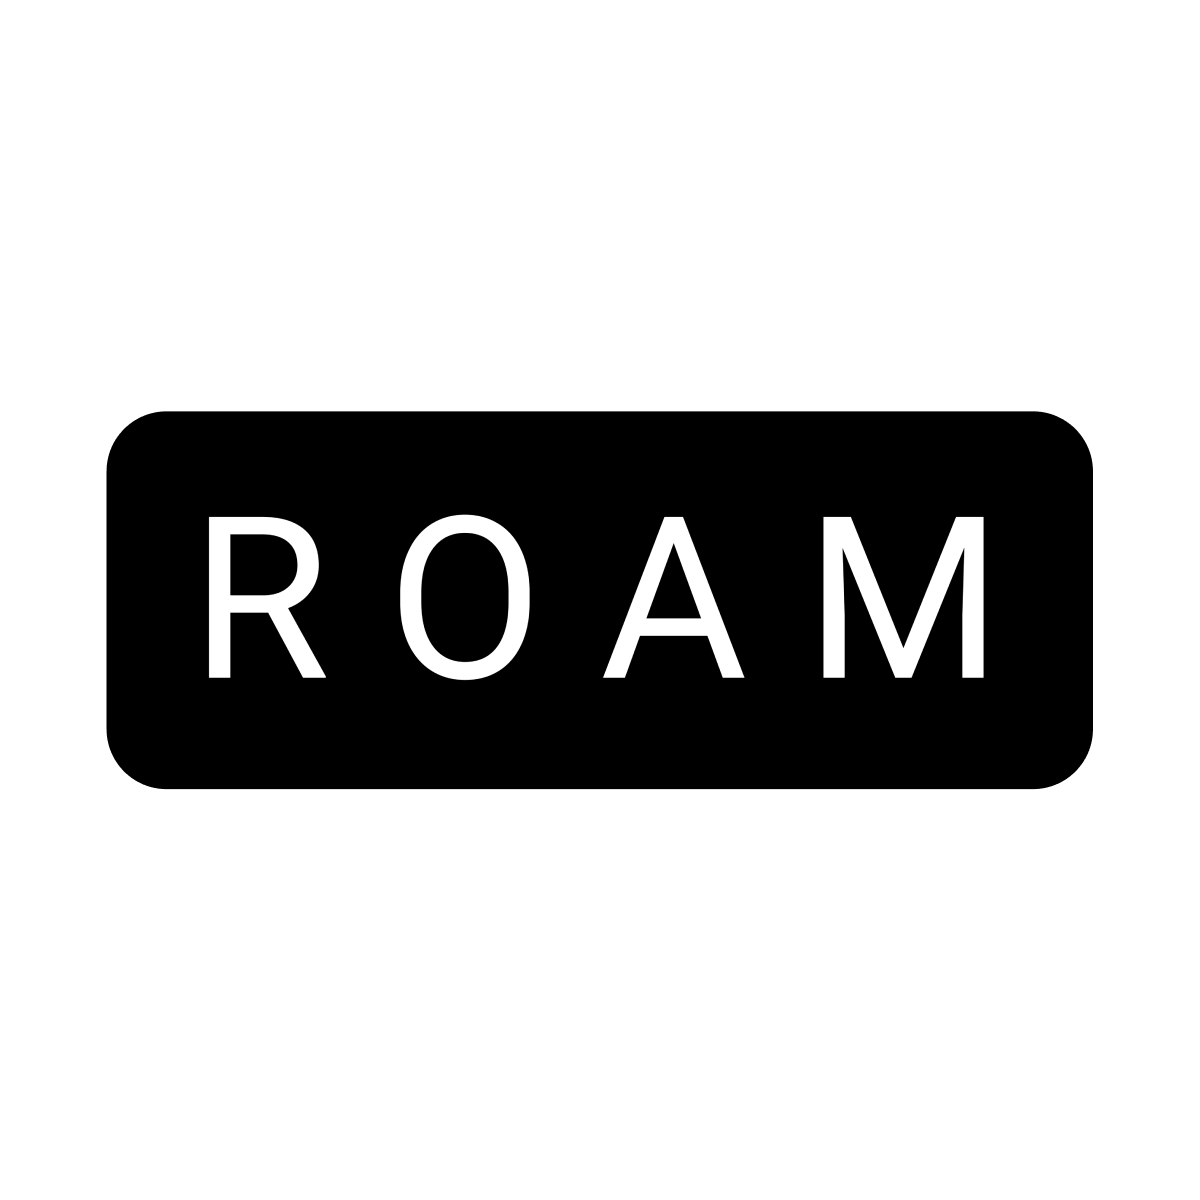 Hire Shopify Experts to integrate Roam Referrals app into a Shopify store